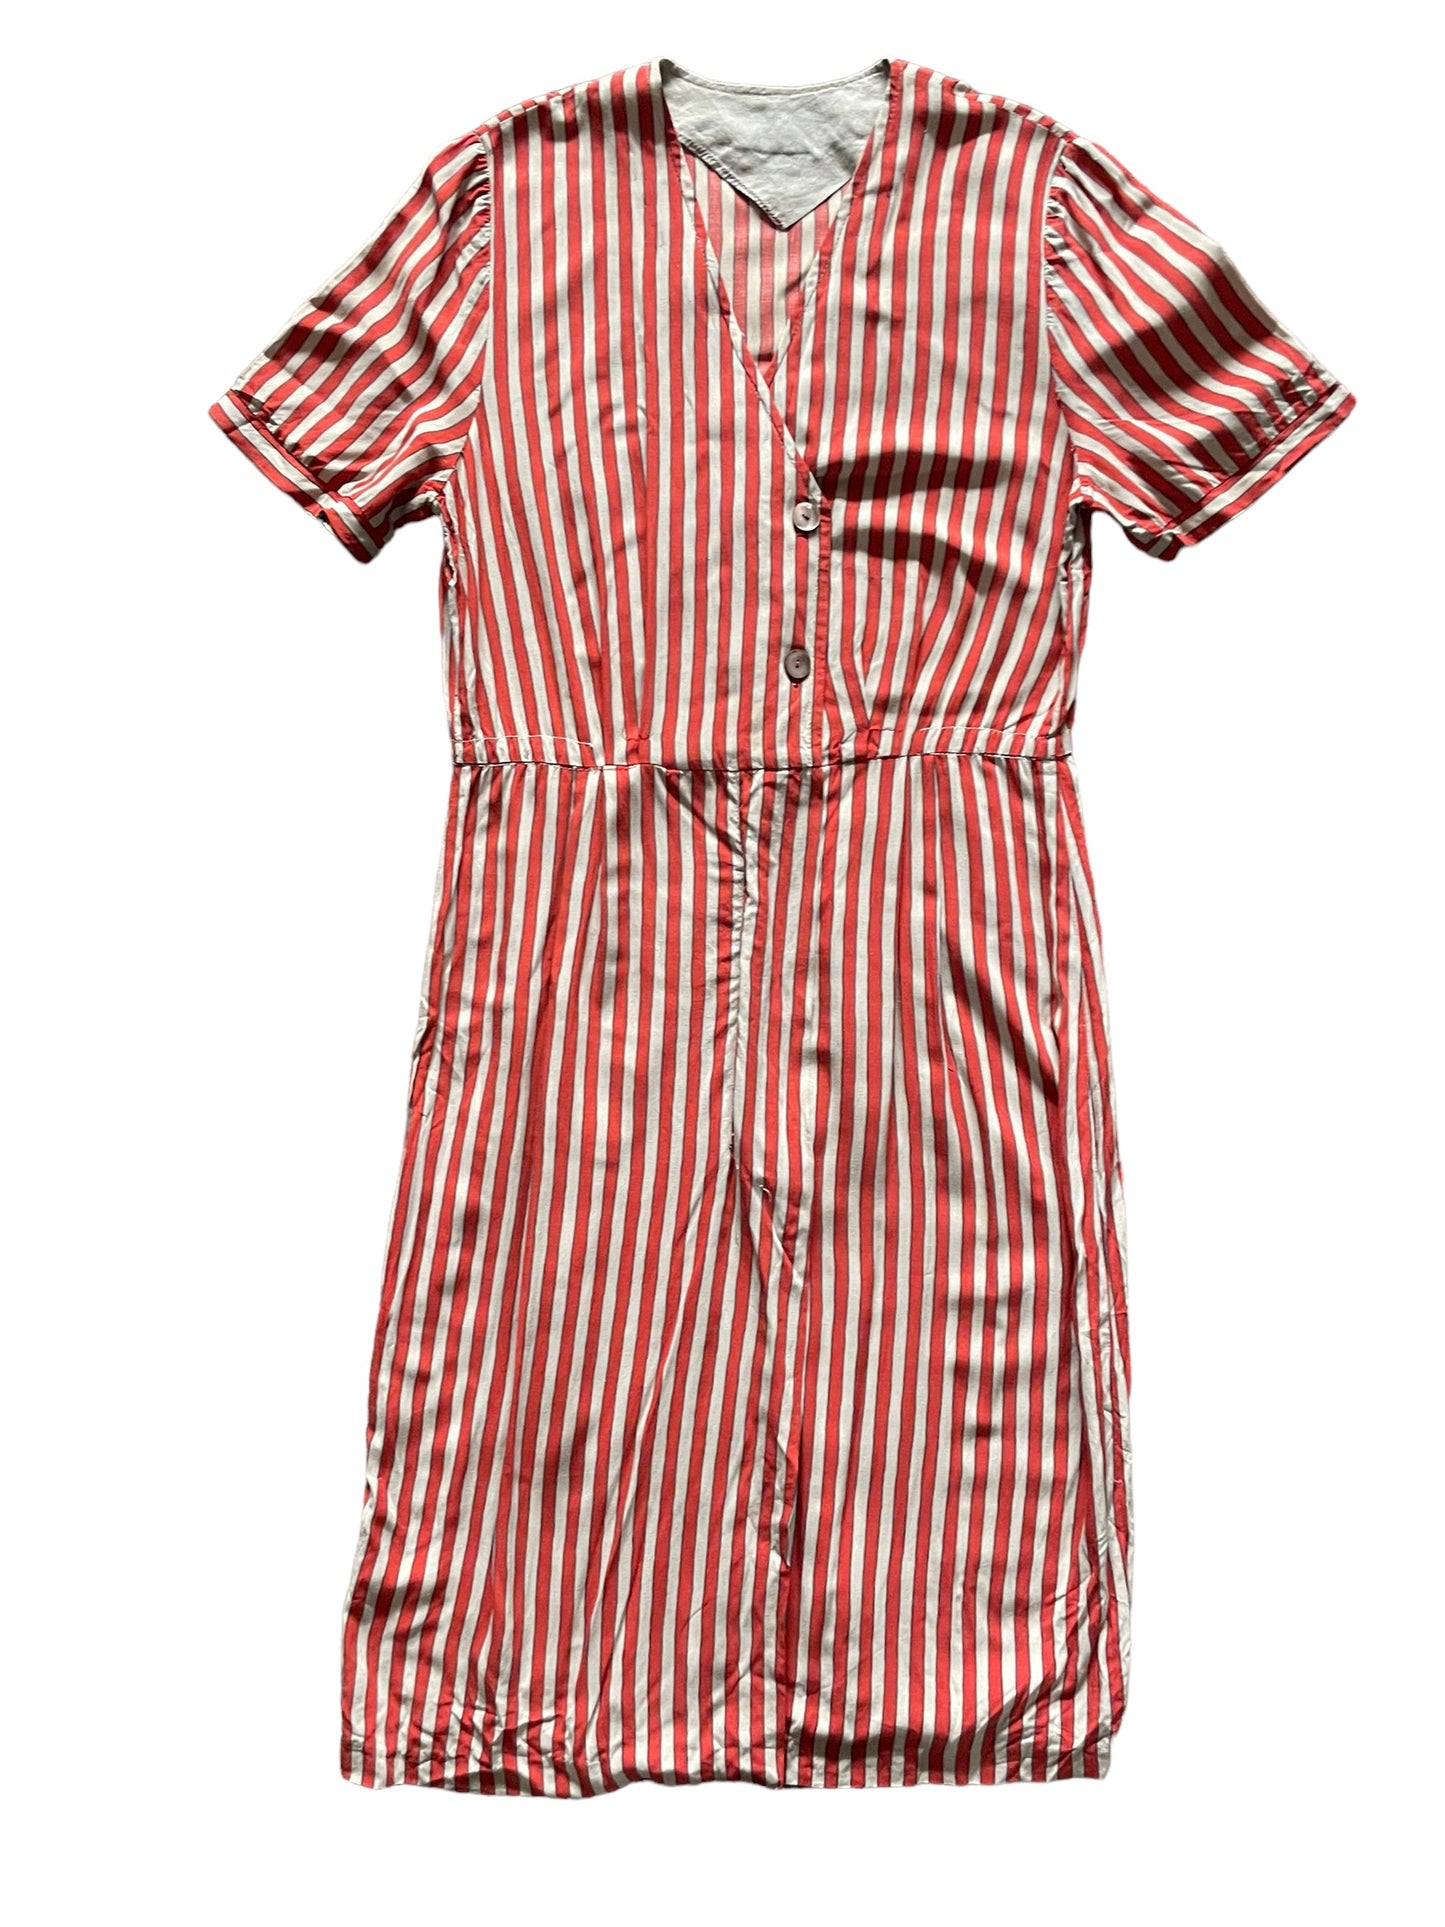 Full front view of Vintage Striped Rayon Dress SZ M |  Barn Owl Vintage Dresses| Seattle Vintage Ladies Clothing